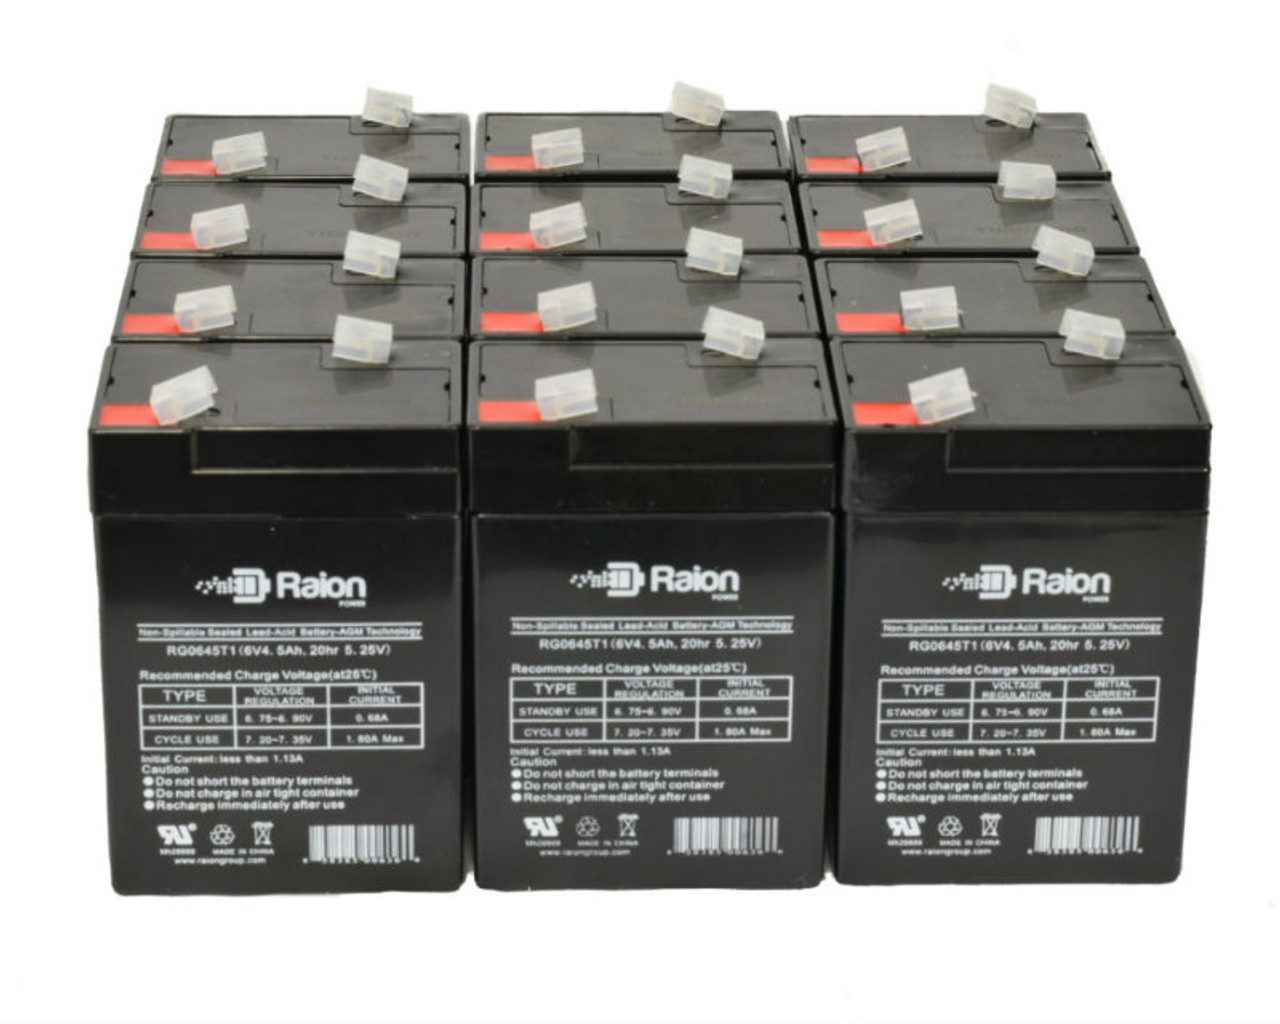 Raion Power 6V 4.5Ah Replacement Emergency Light Battery for Lithonia ELM2 Series - 12 Pack